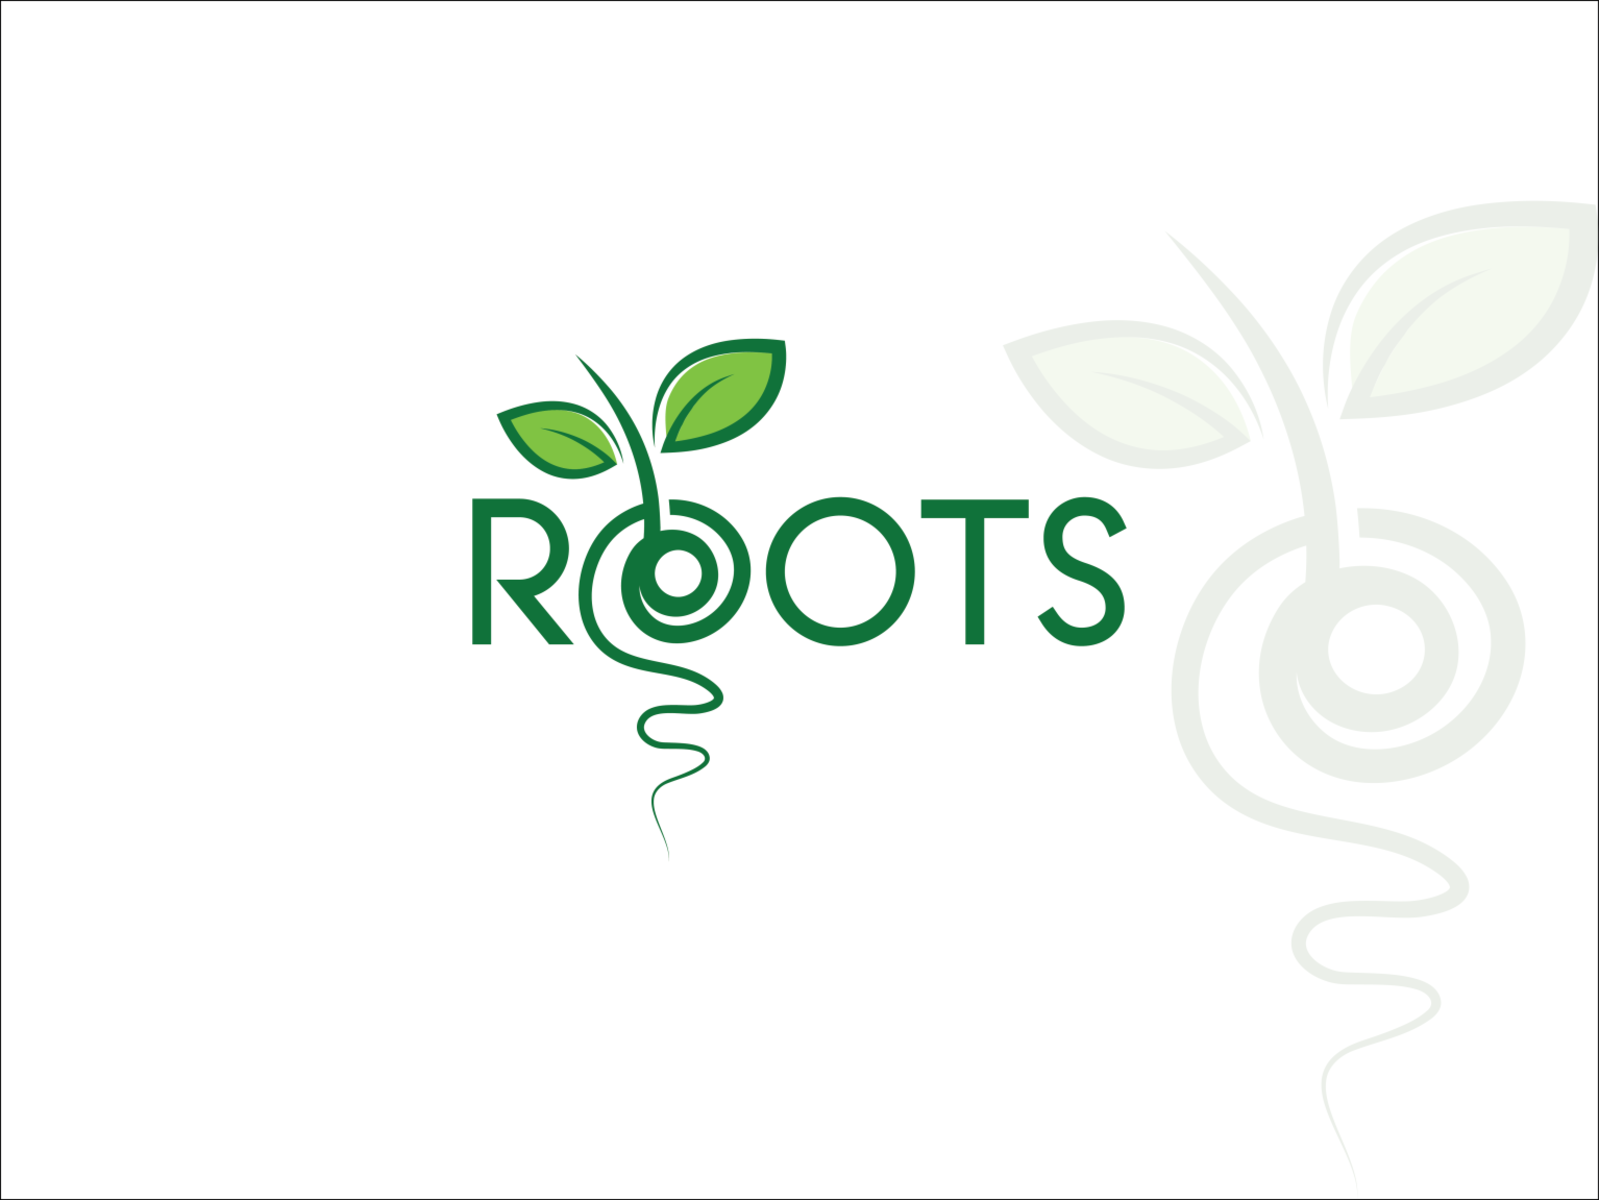 Roots by Mizan on Dribbble